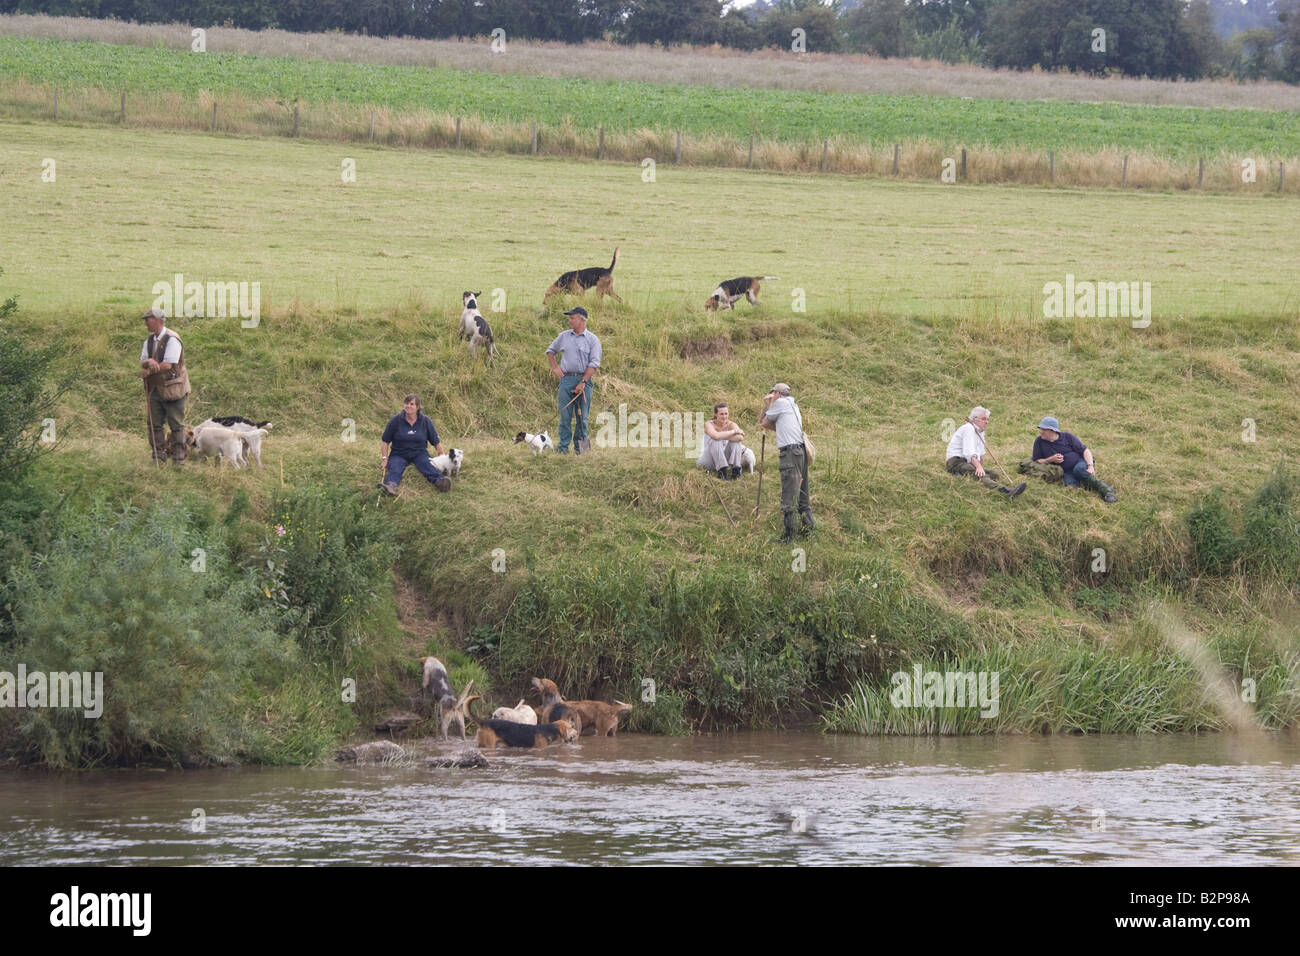 A caccia di visone con otter hounds sulle rive del fiume Wye Hoarwithy Herefordshire UK Foto Stock